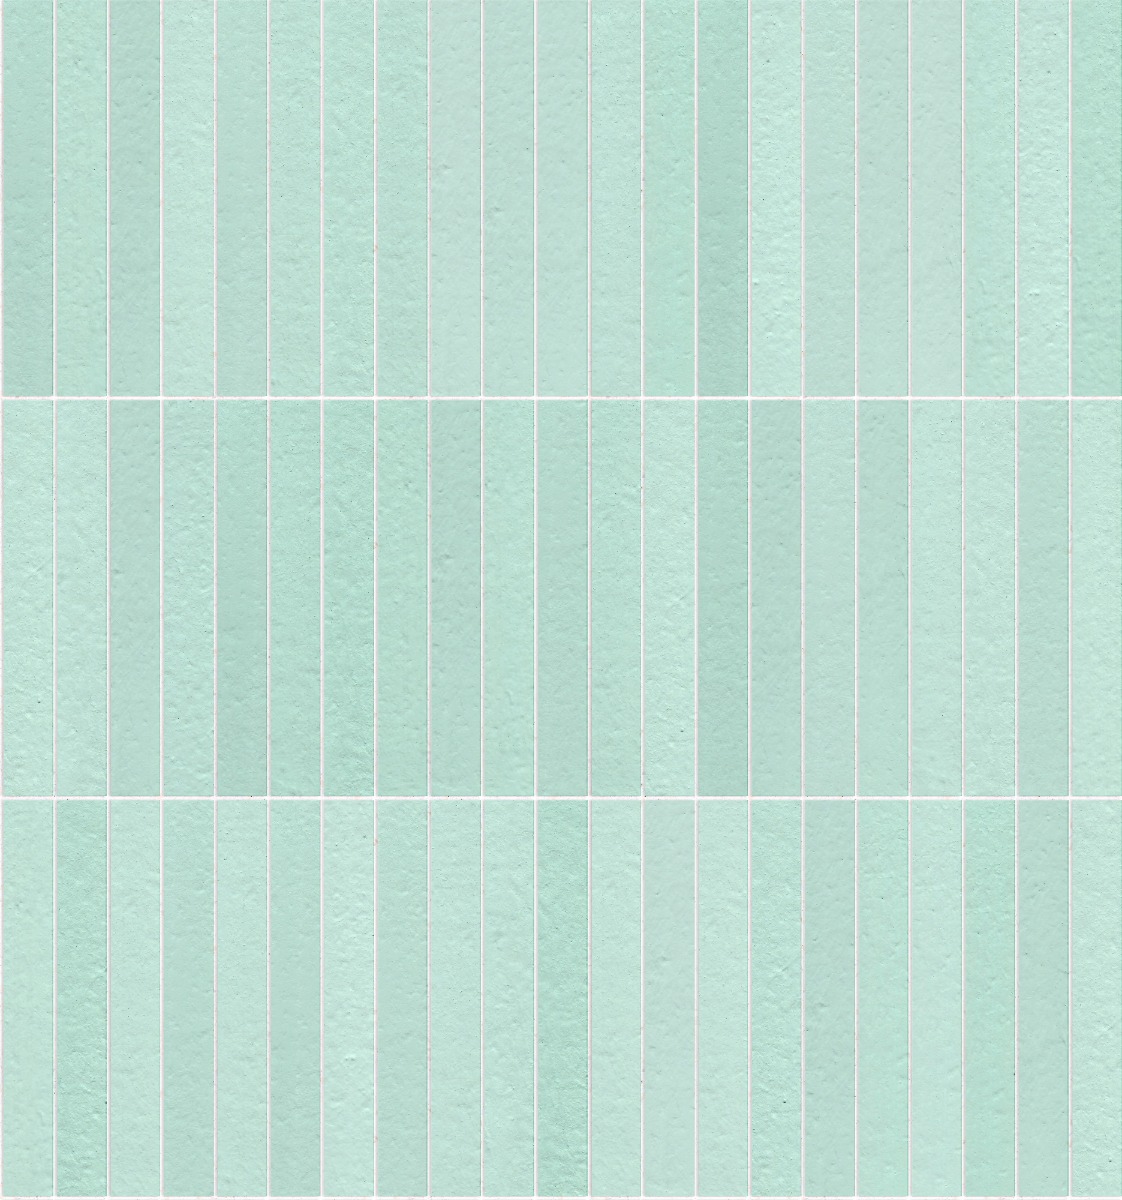 A seamless brick texture with mint green brick units arranged in a Stack pattern